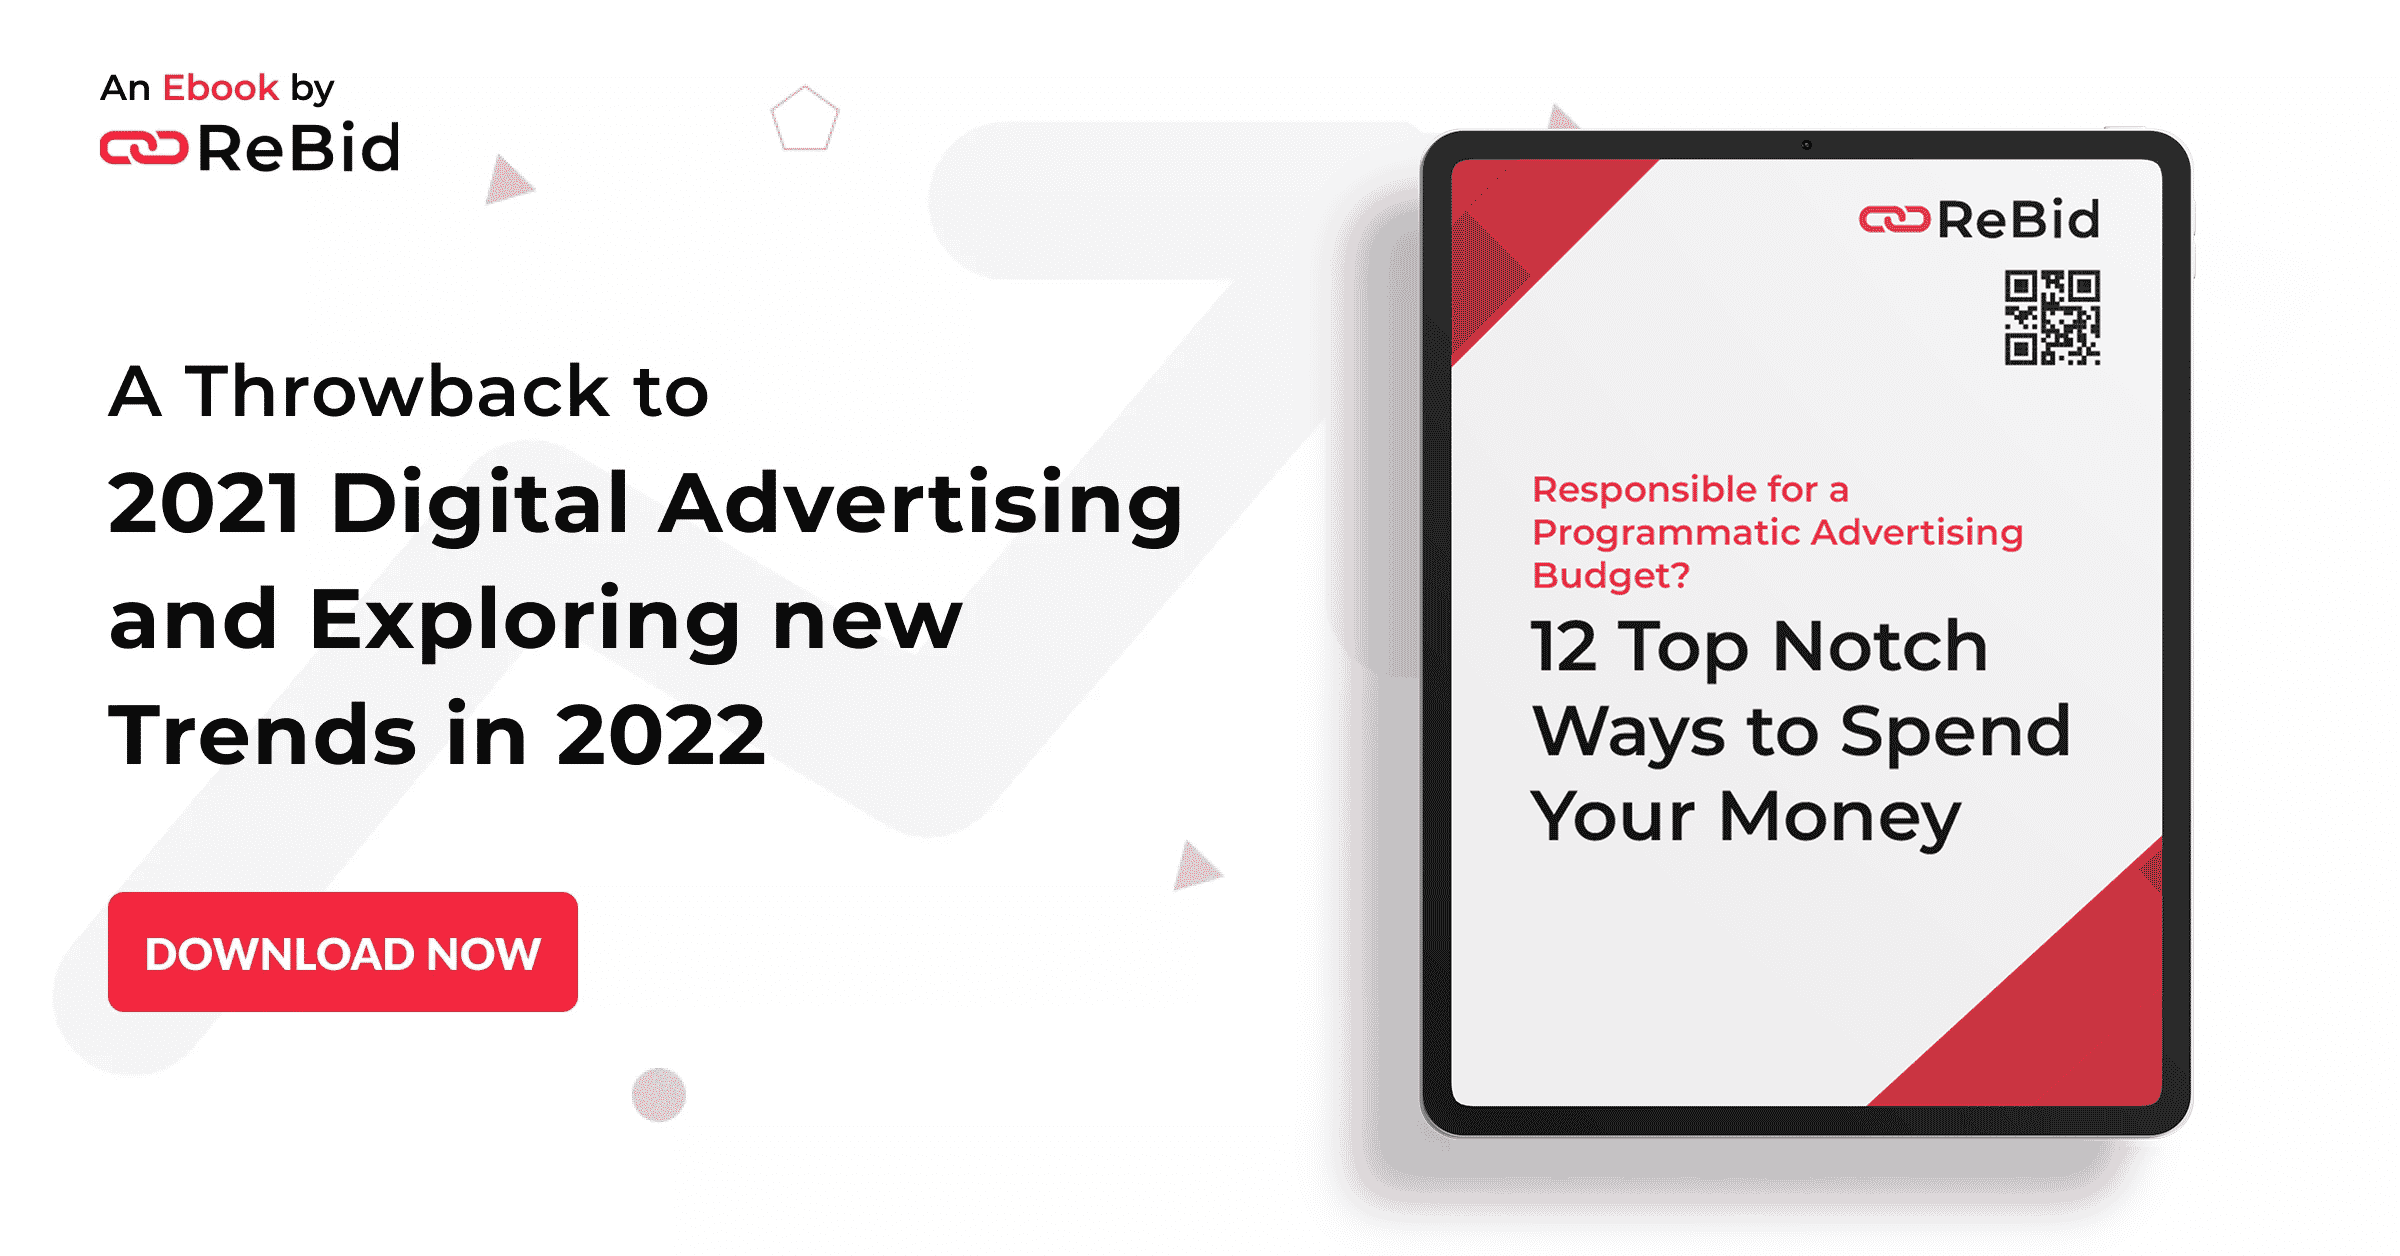 A Throwback to 2021 Digital Advertising and Exploring new Trends in 2022